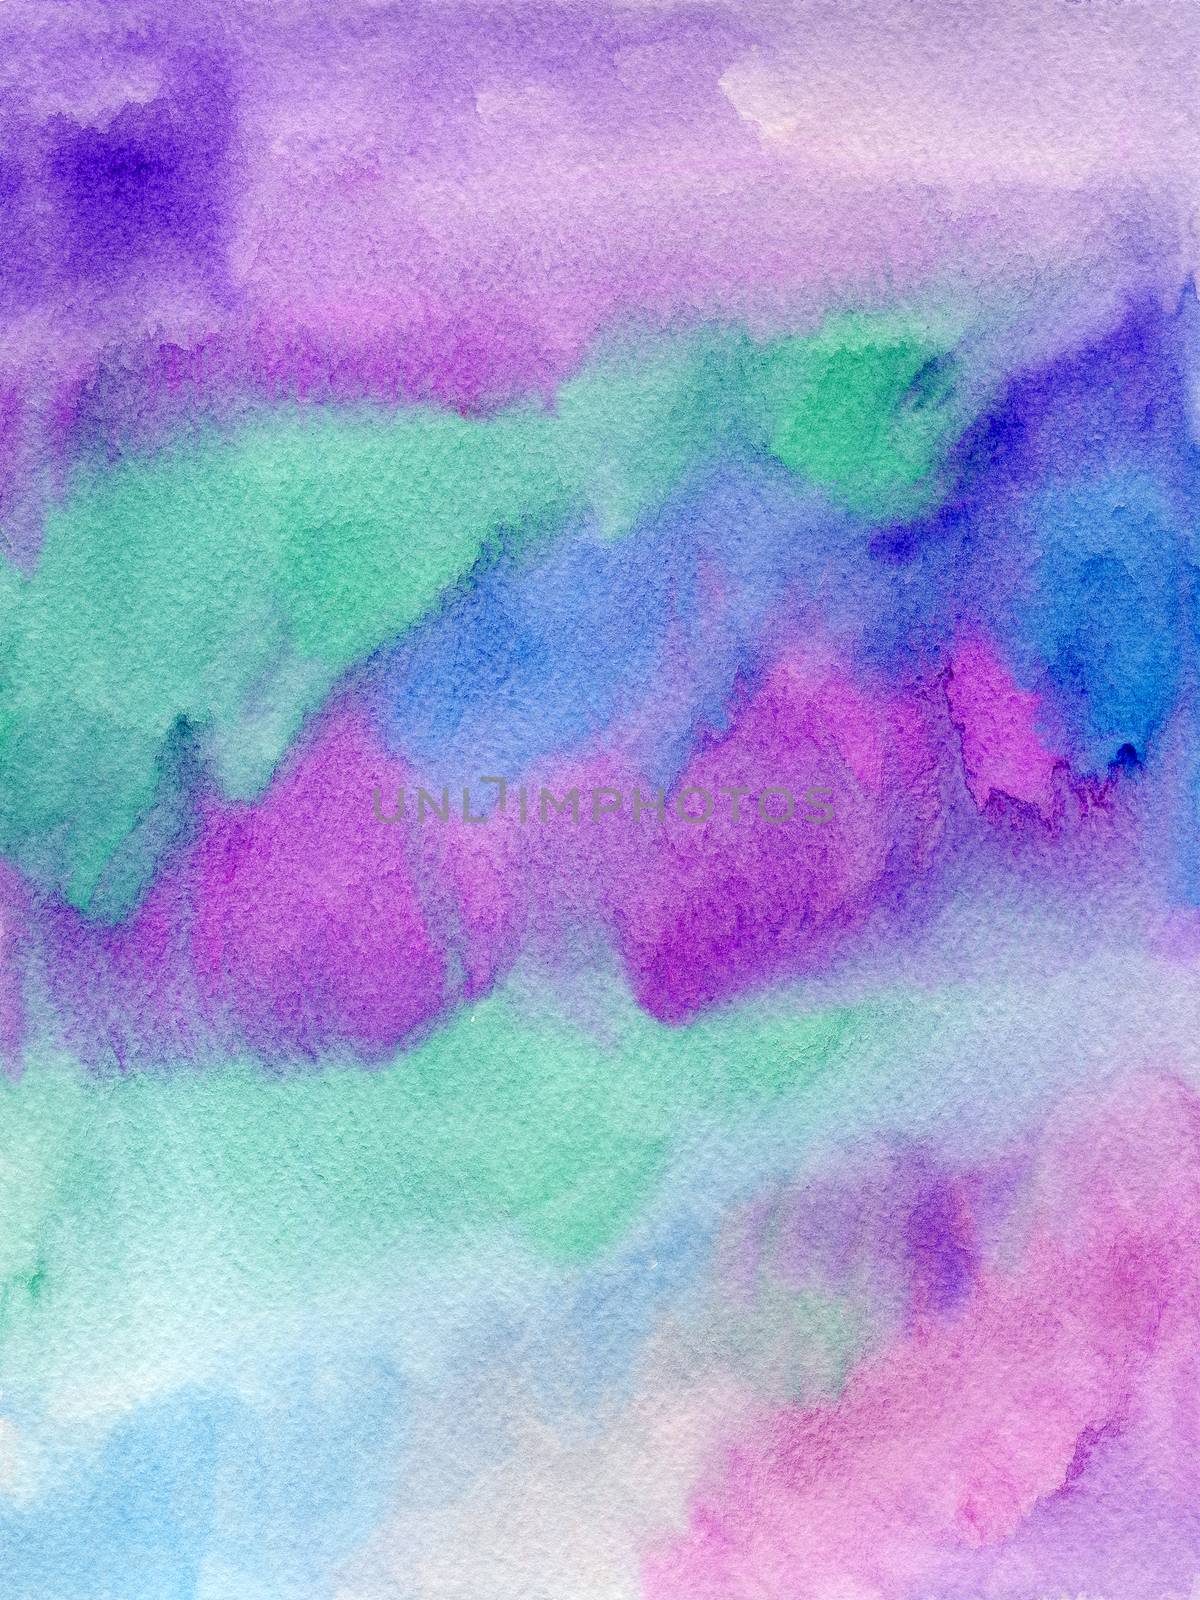 Hand drawing watercolor in violet, blue and turquoise colors on texture paper.  by LanaLeta